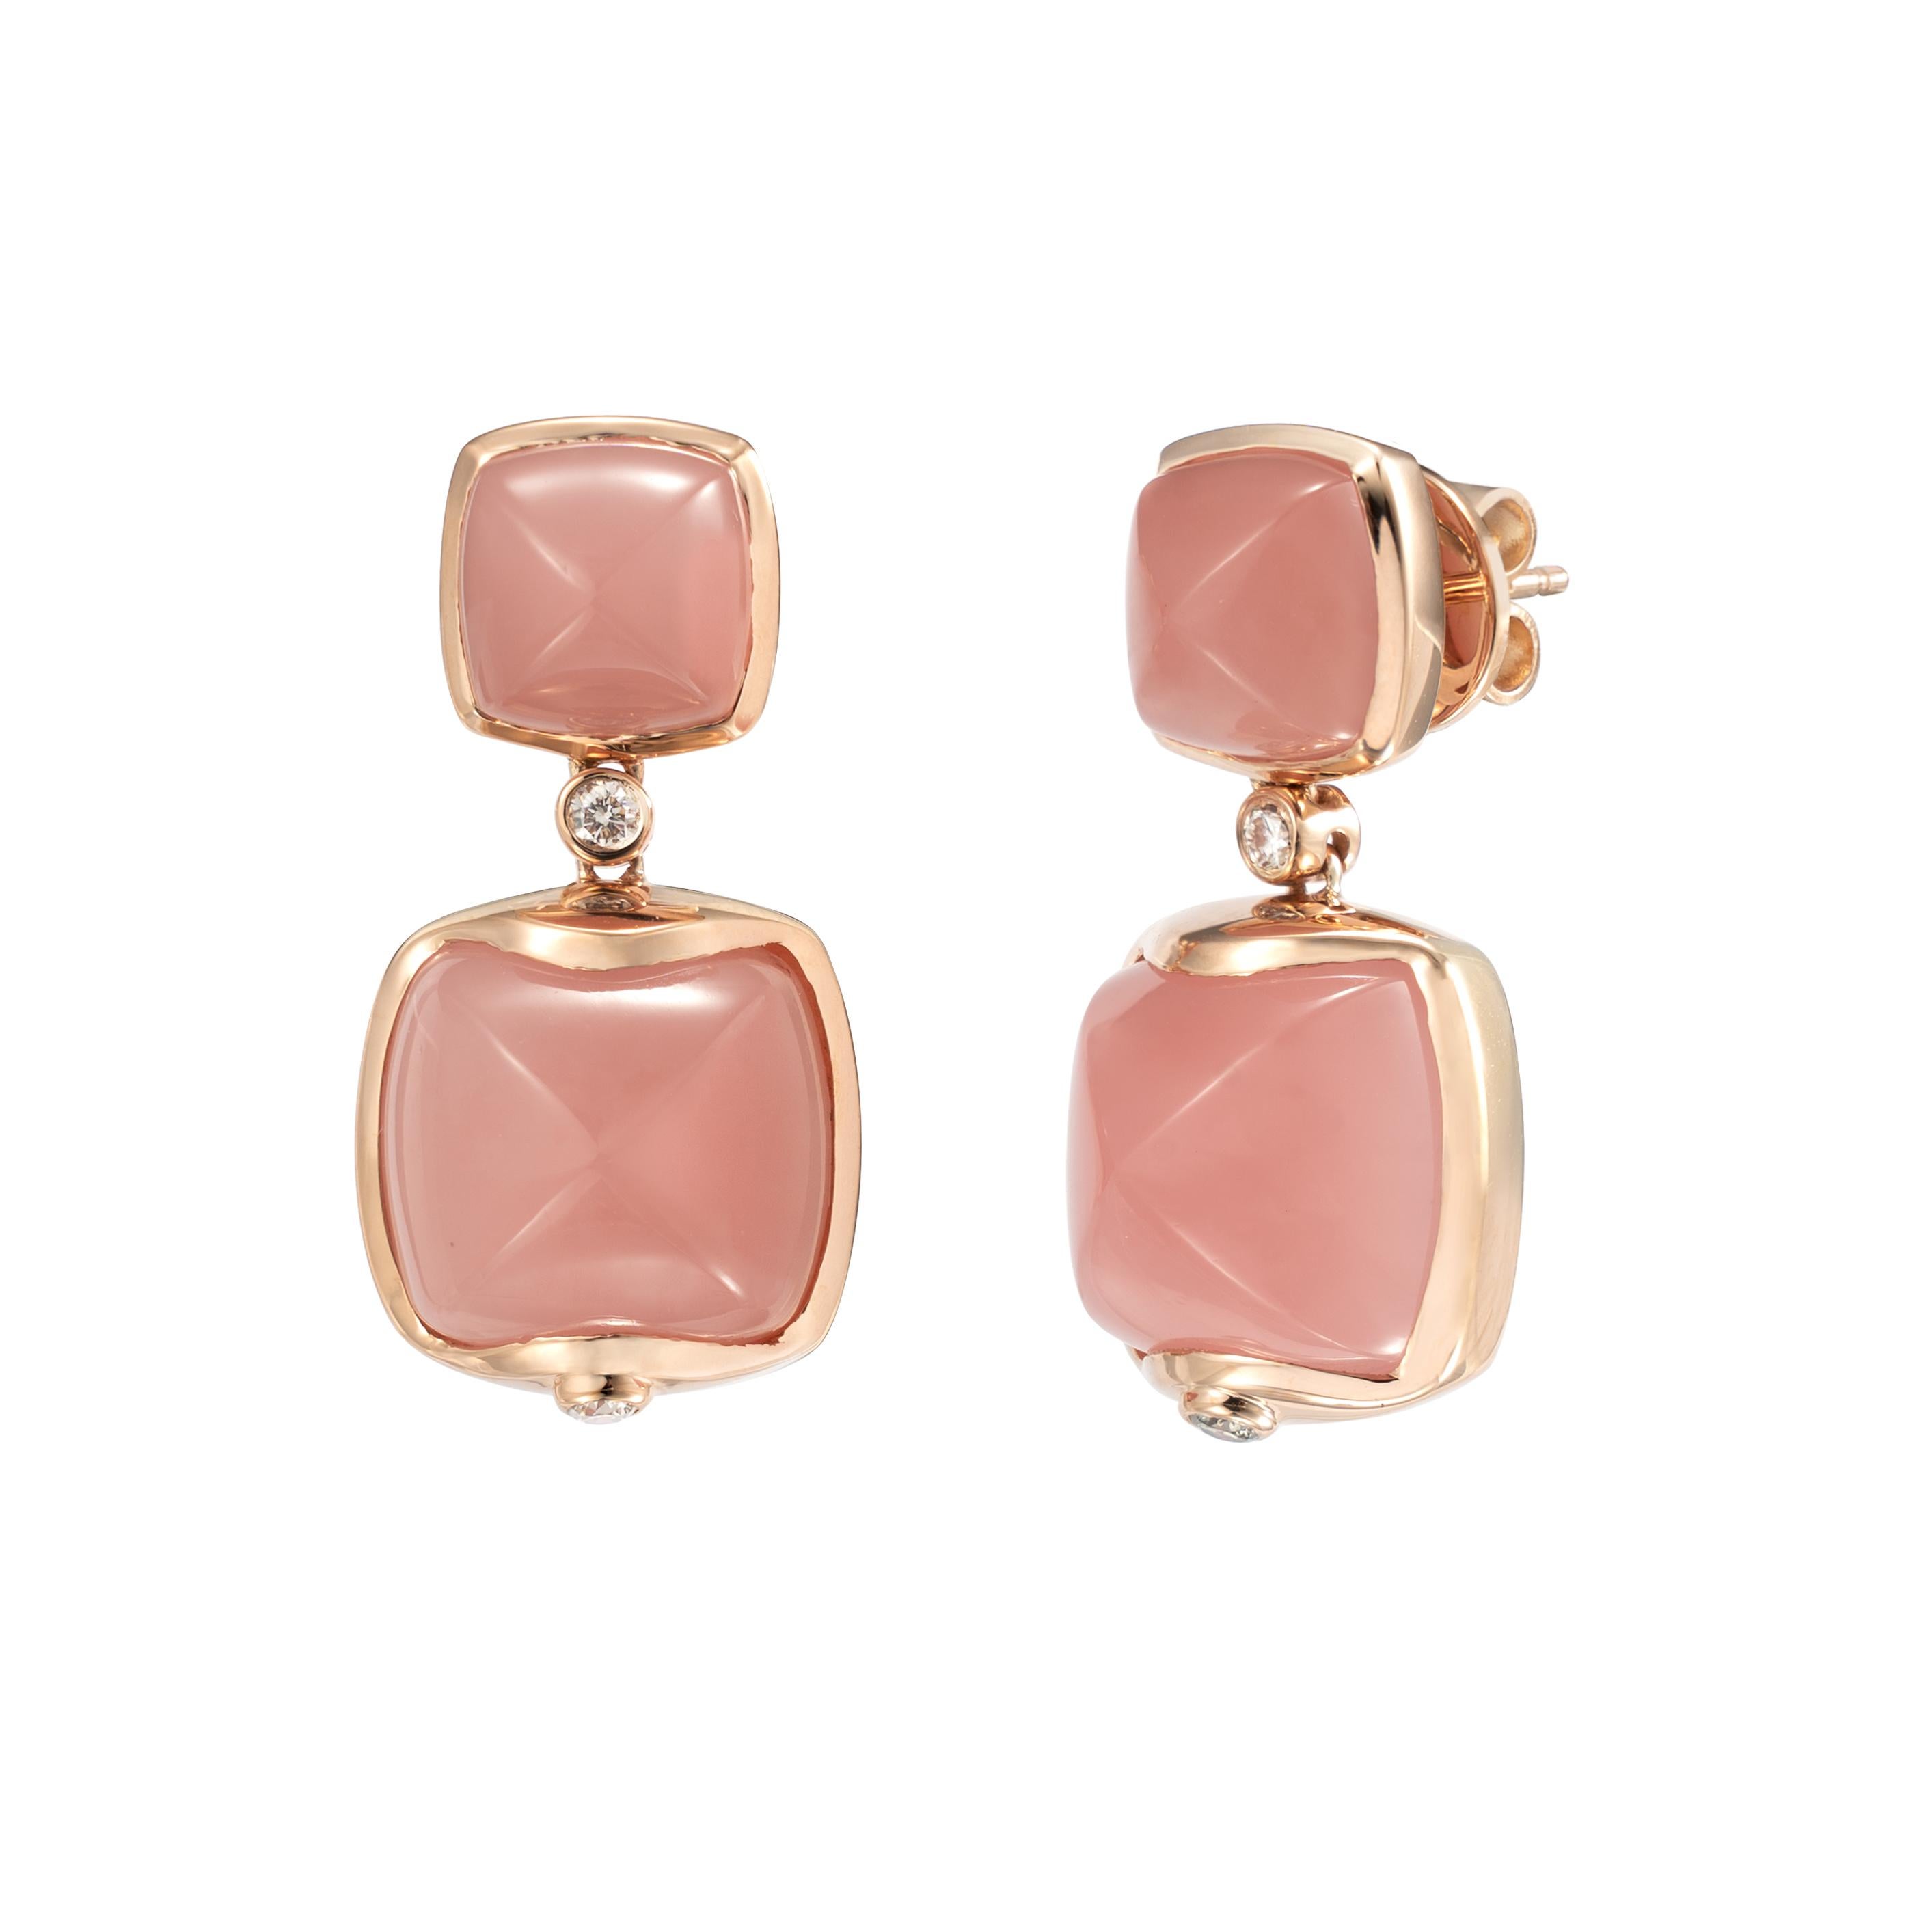 Sweet Sugarloaves! Light and easy to wear these earrings showcase beautiful sugarloaf gemstones accented with a gold frame and diamonds. These earrings are dainty yet have a great pop of color from the vibrant gems.

Guava Quartz Sugarloaf Earrings